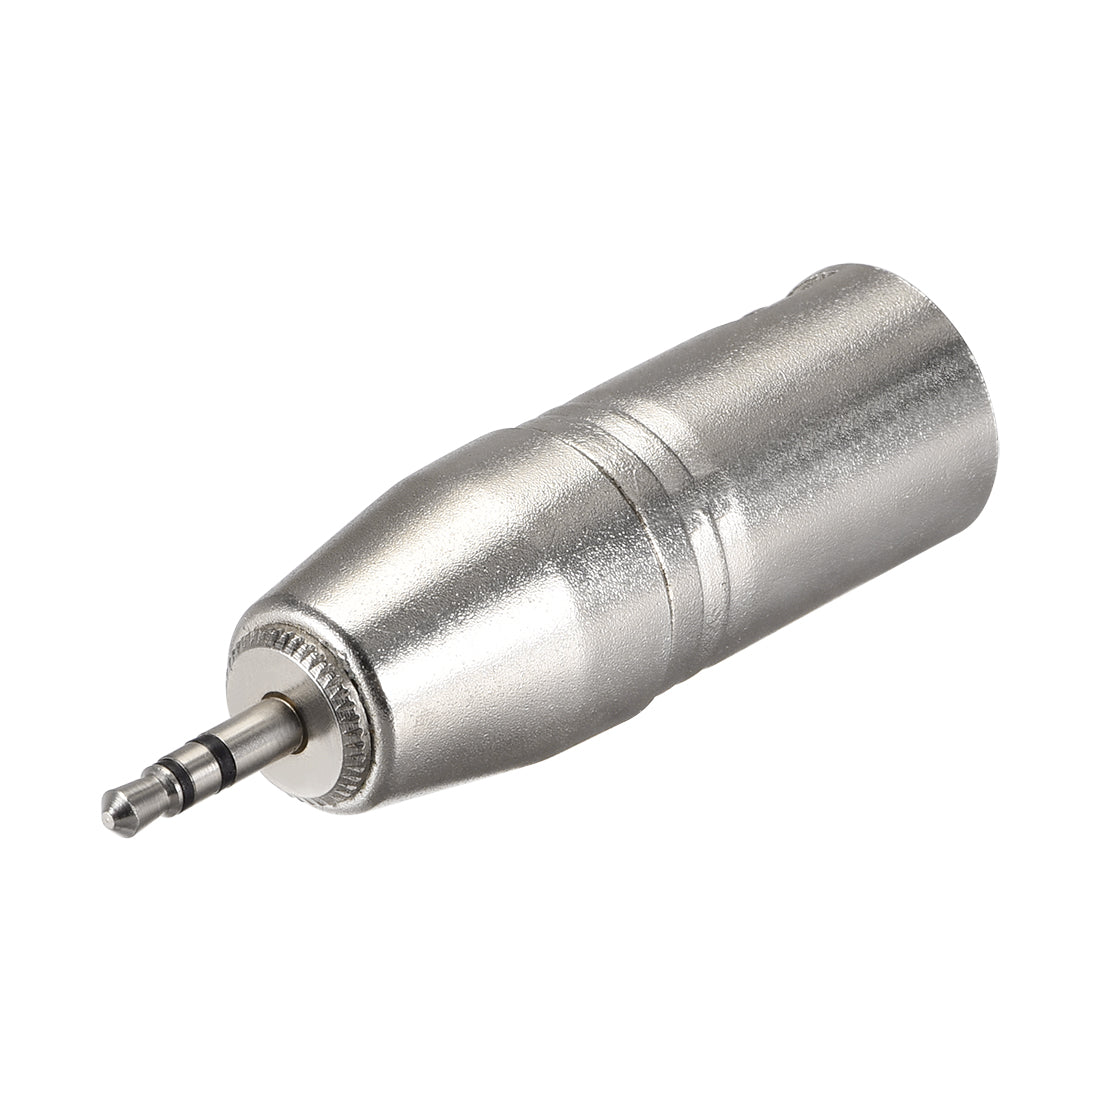 uxcell Uxcell XLR Male to 1/8" Male TRS Adapter,Gender Changer - XLR-M to 3.5mm Coupler	Adapters,Microphones Plug In Audio Connector,Mic Male Plug